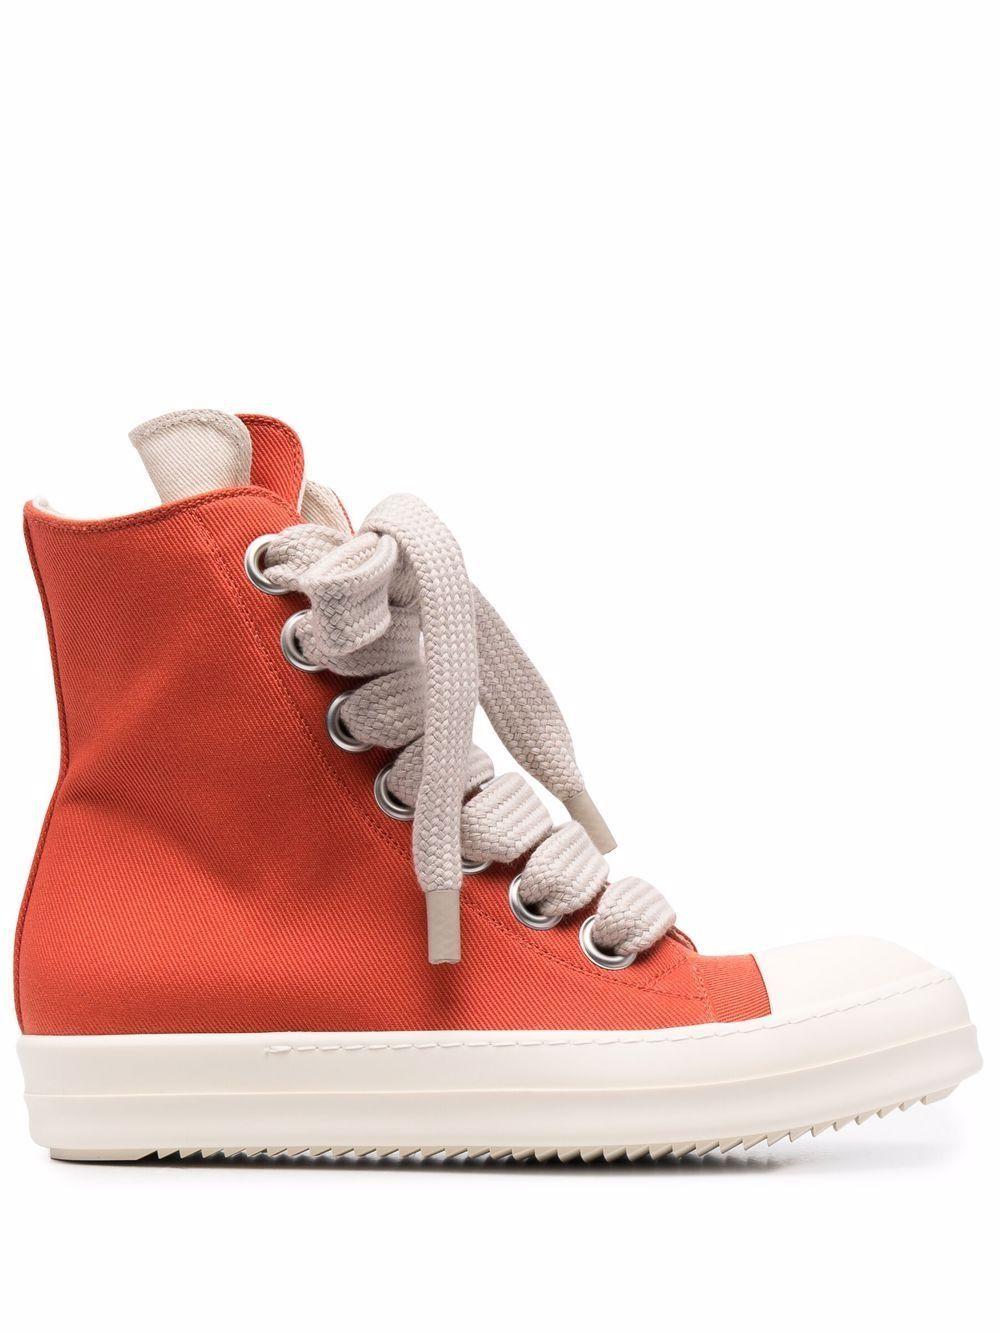 Rick Owens Lace-up High-top Sneakers in for Men Lyst